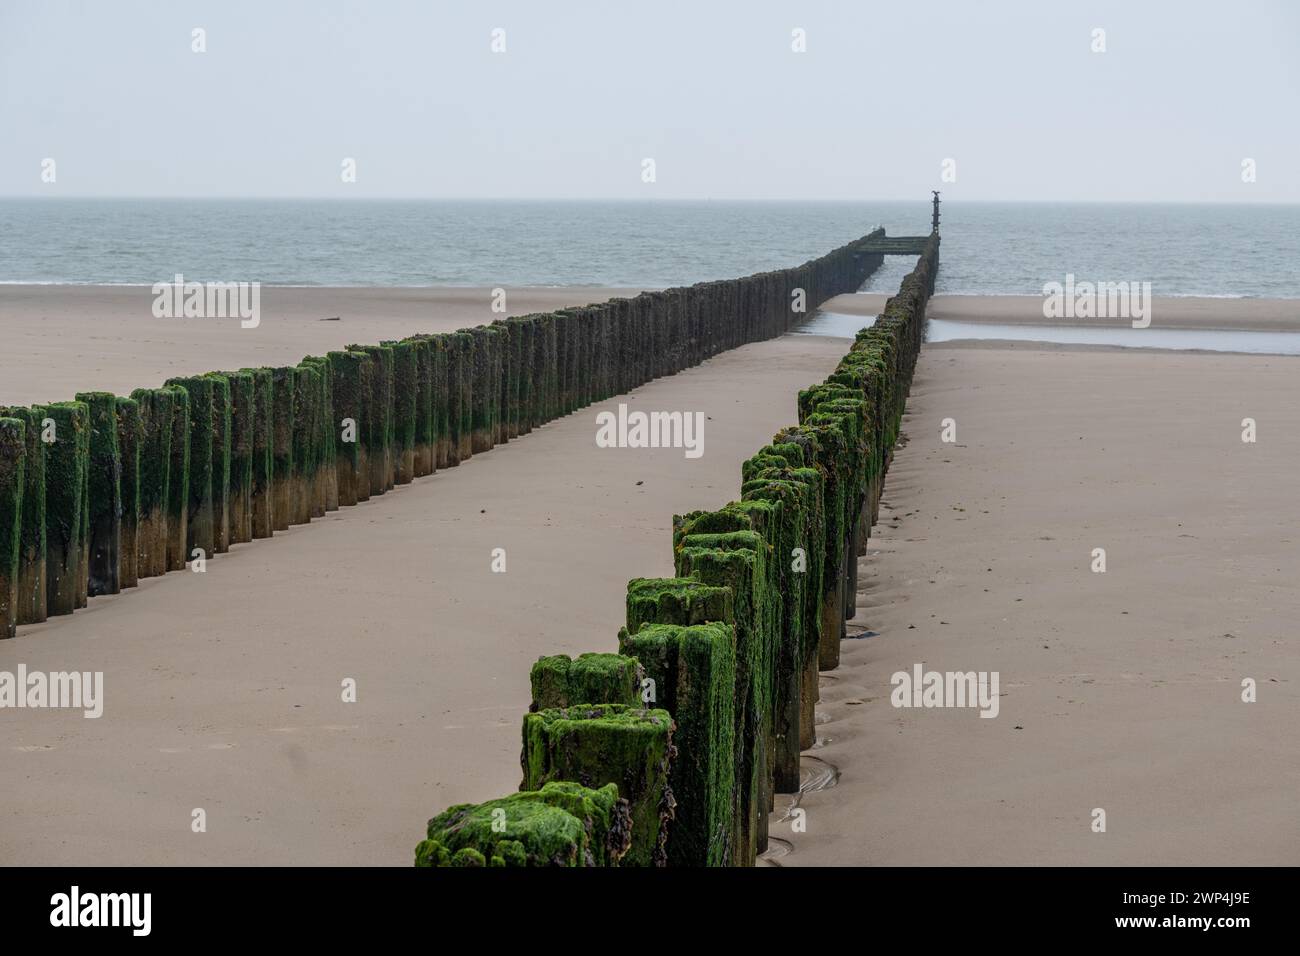 An algae-covered breakwater juts out into the sea Stock Photo